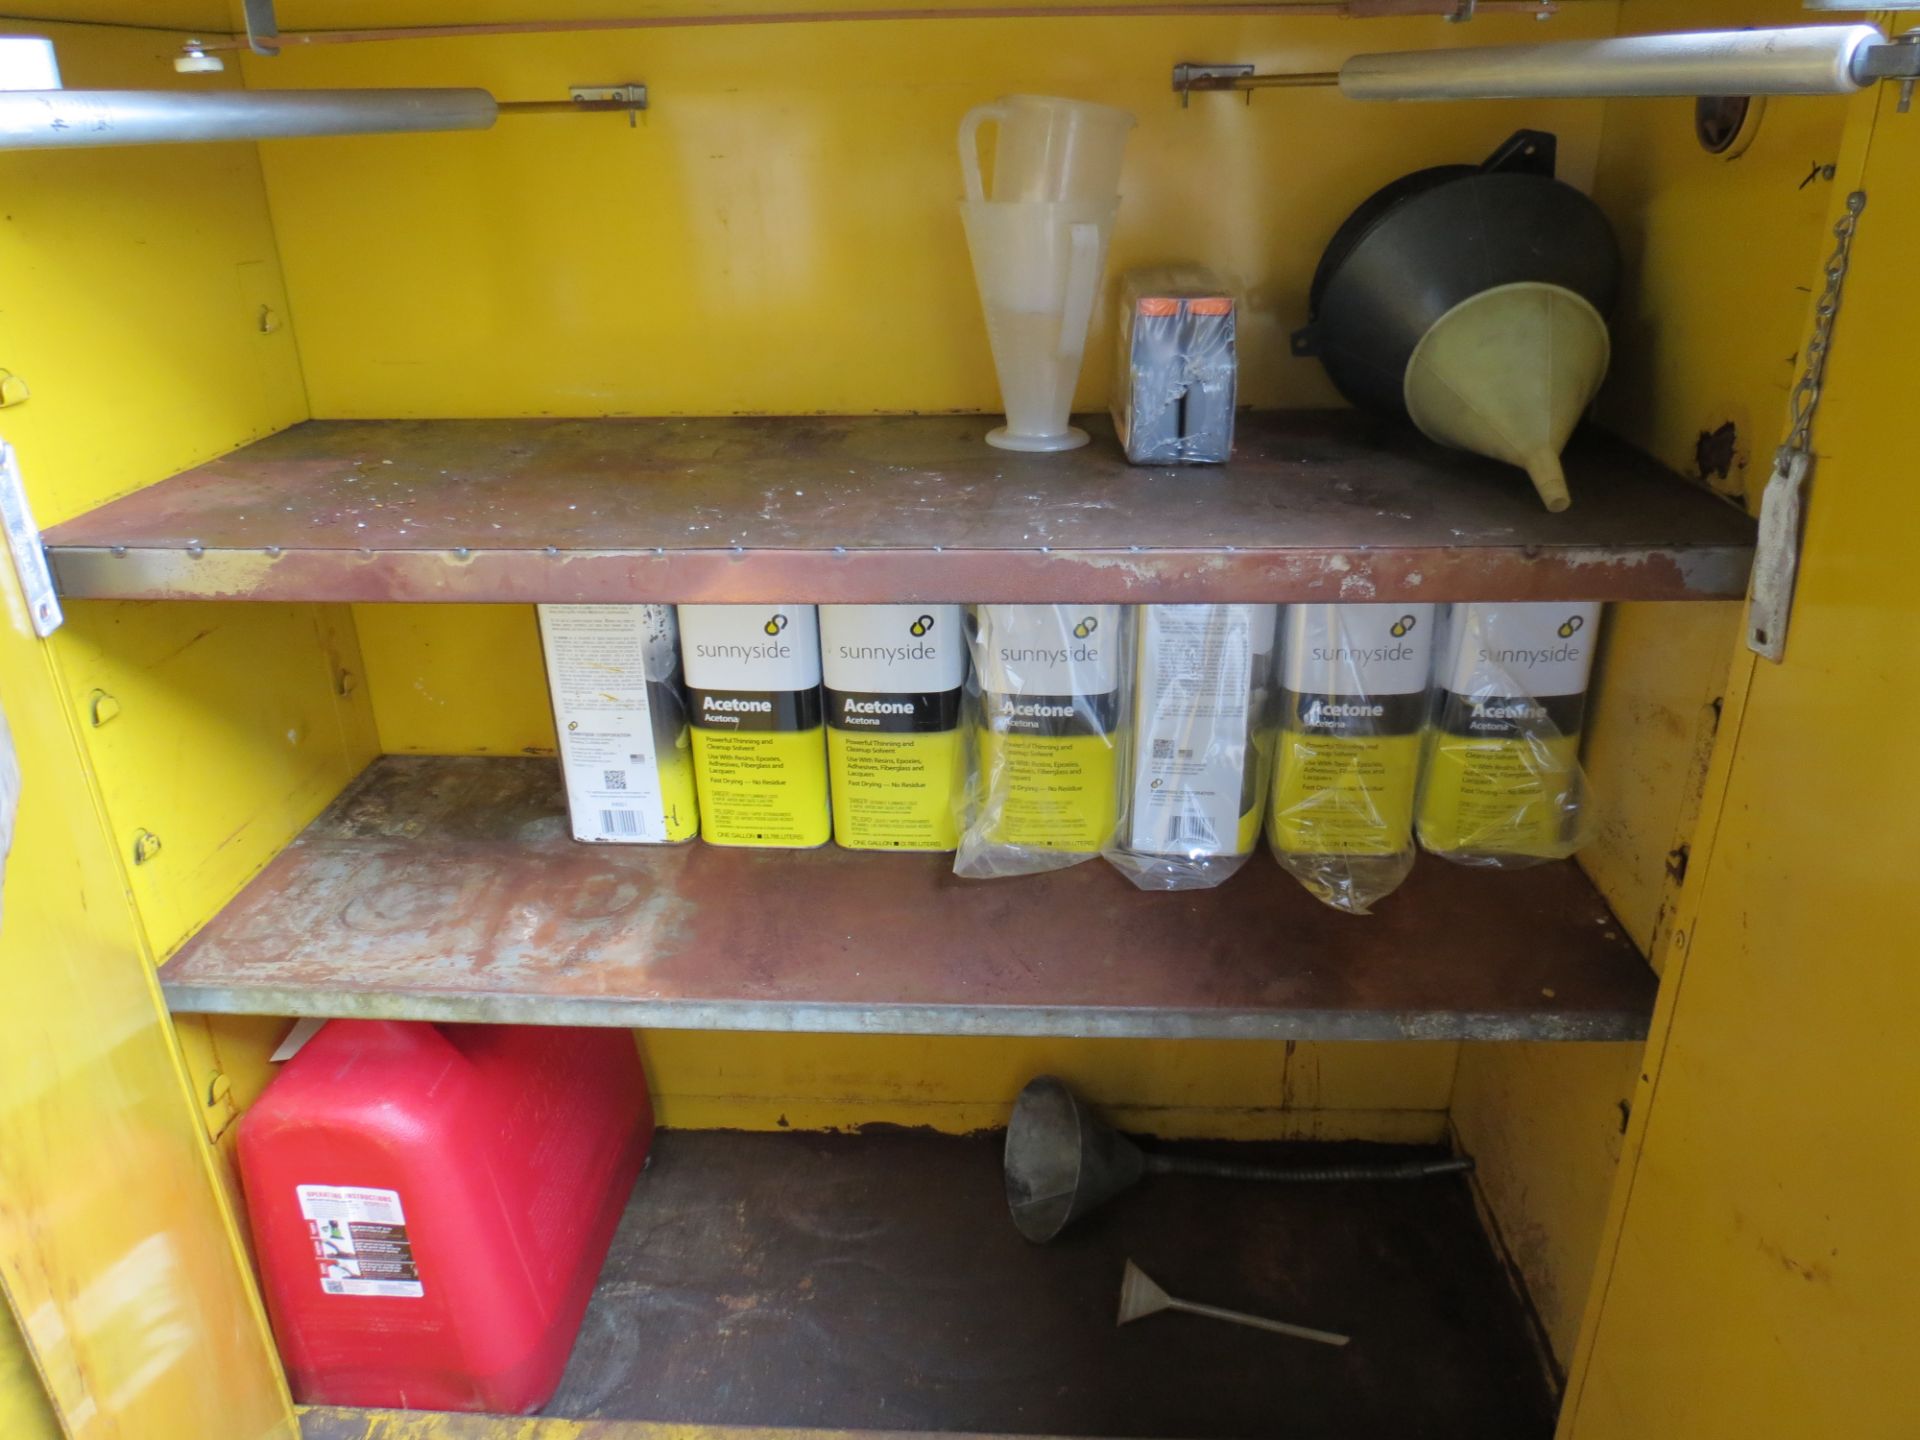 YELLOW 2-DOOR FLAMMABLE STORAGE CABINET WITH STAND - Image 2 of 2